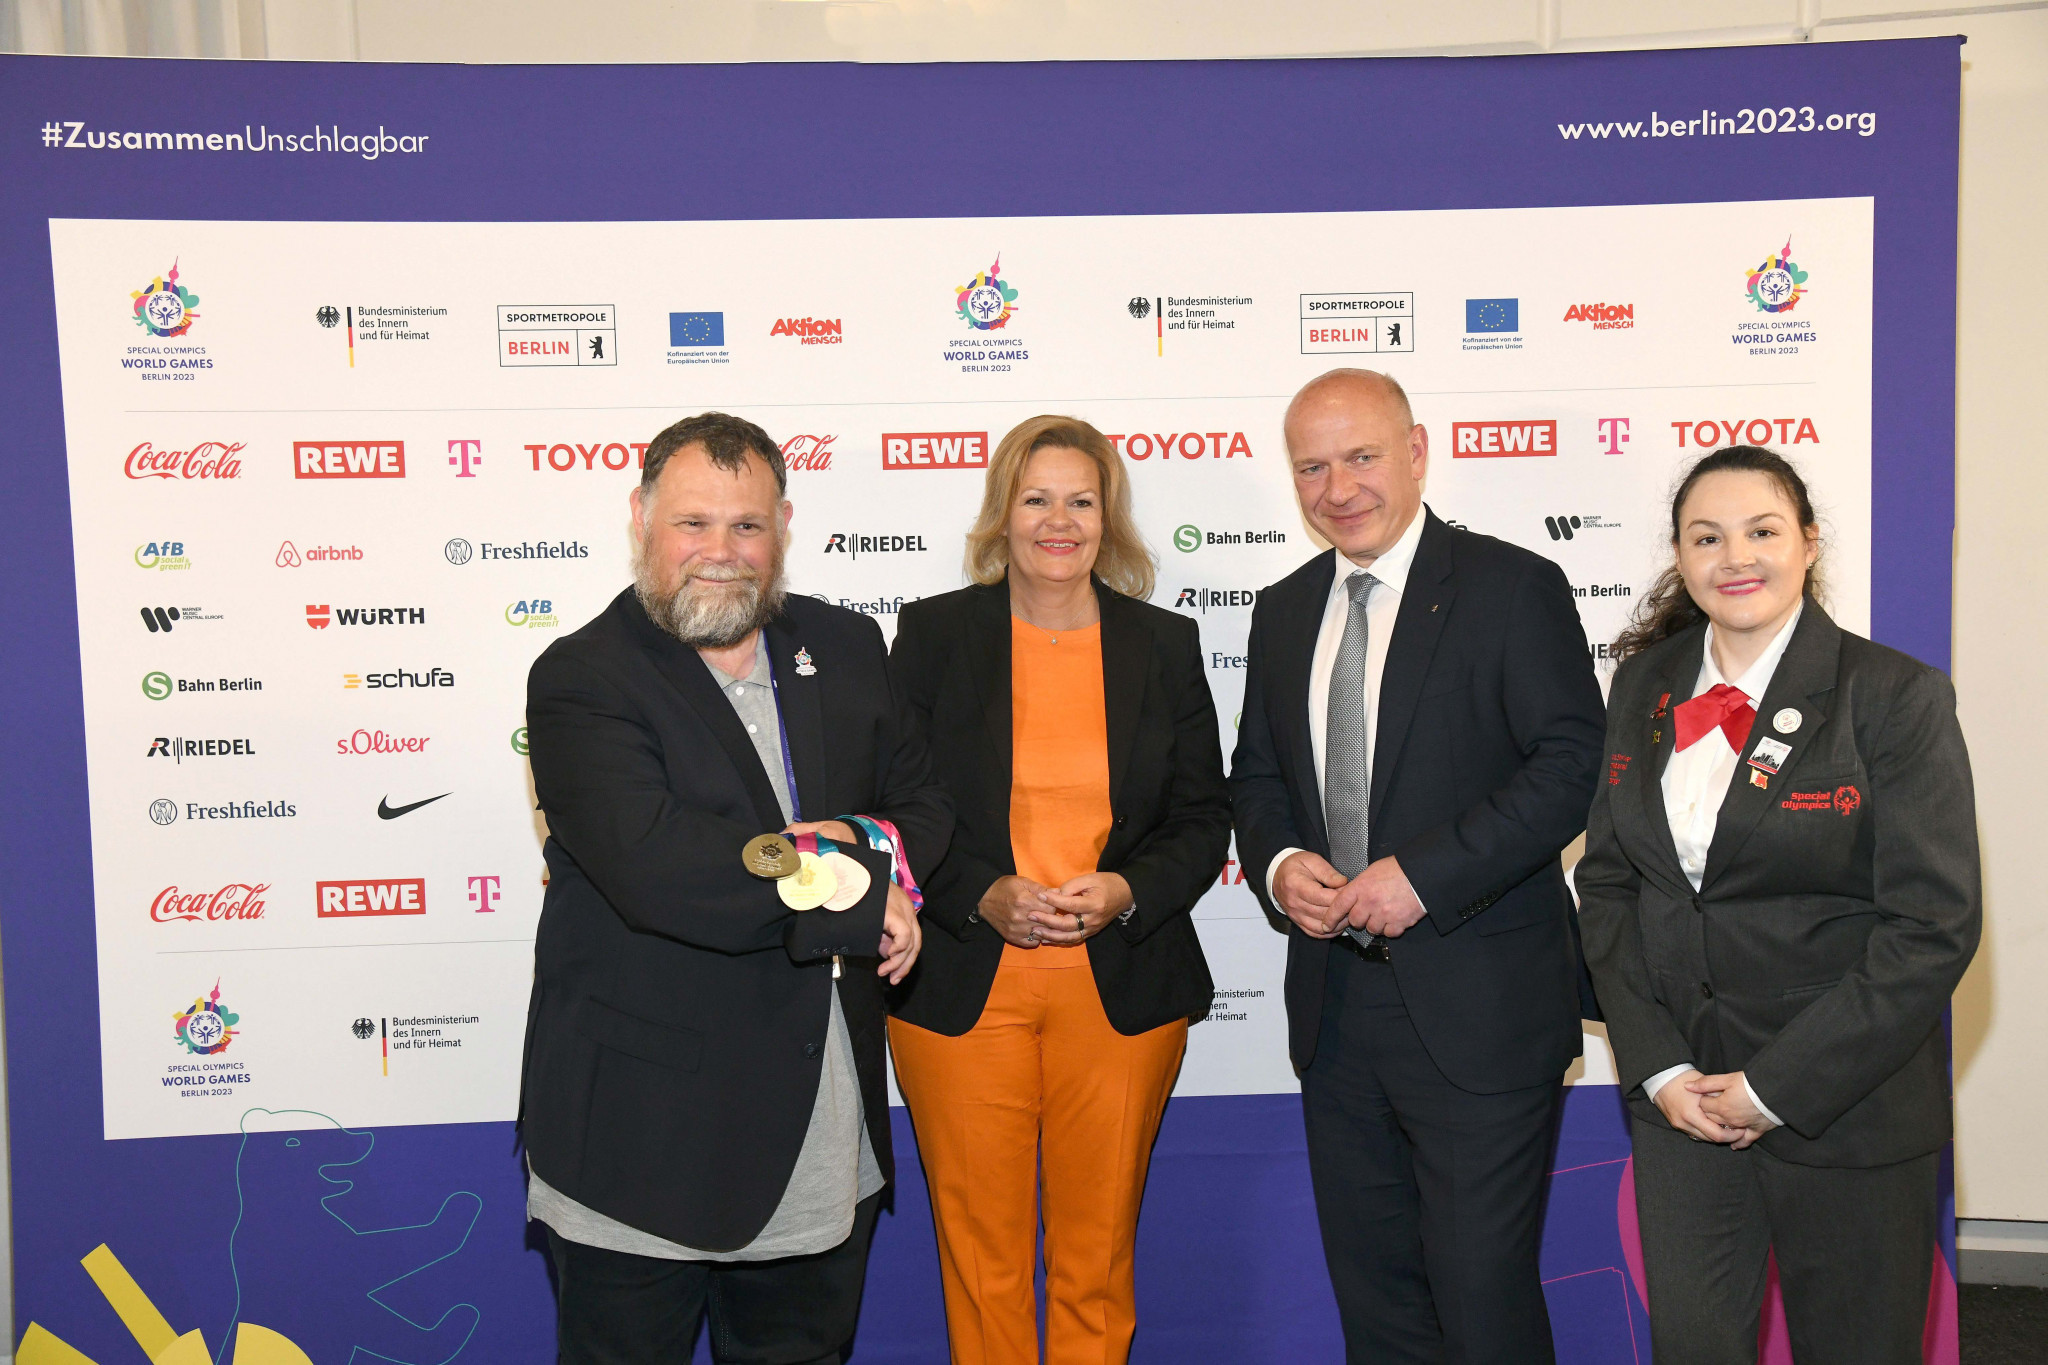 German Interior Minister Nancy Faeser, second left, said the Special Olympics World Games 